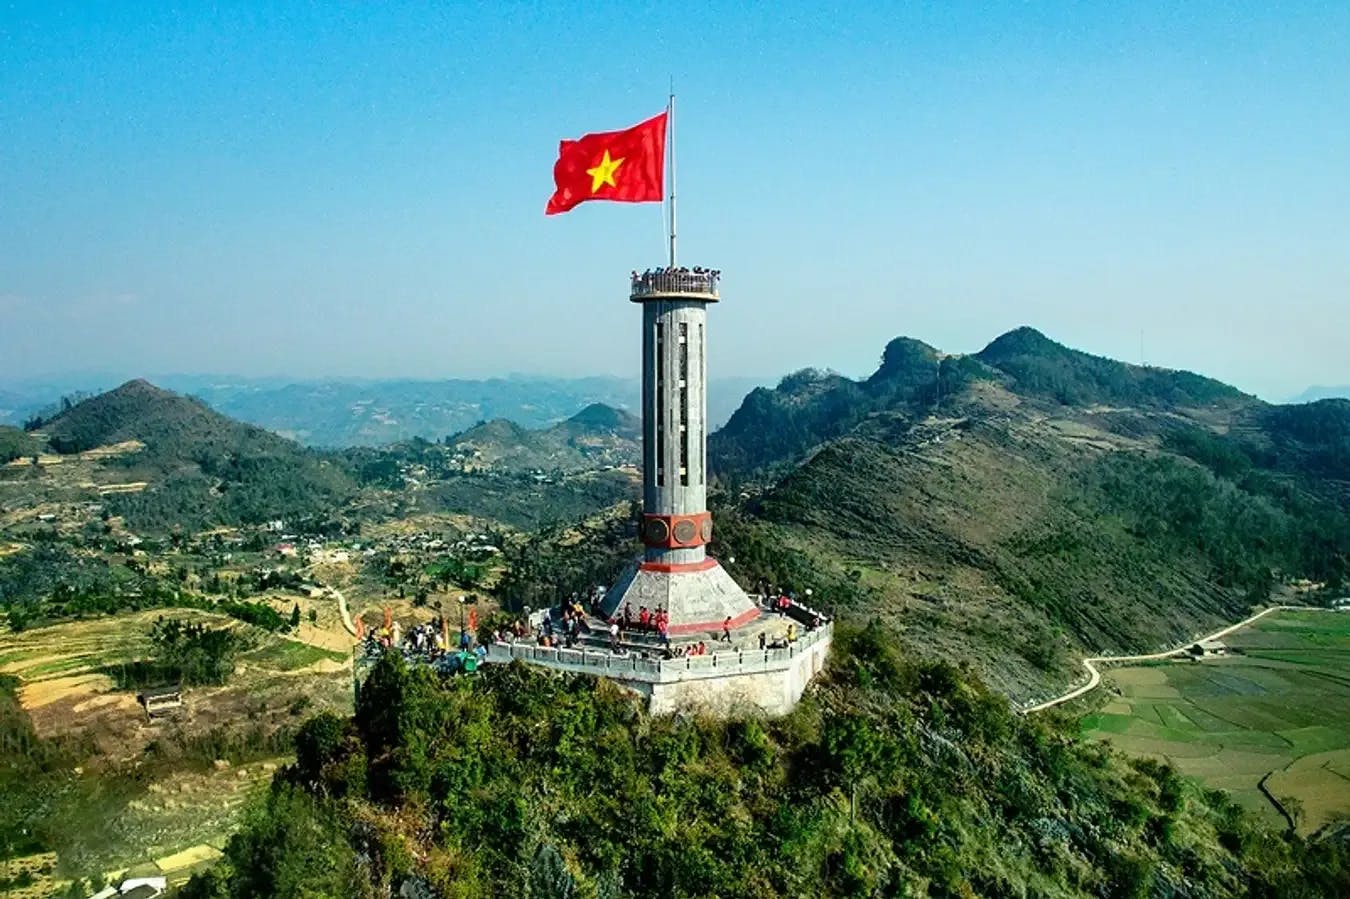 Visit Lung Cu national flag tower